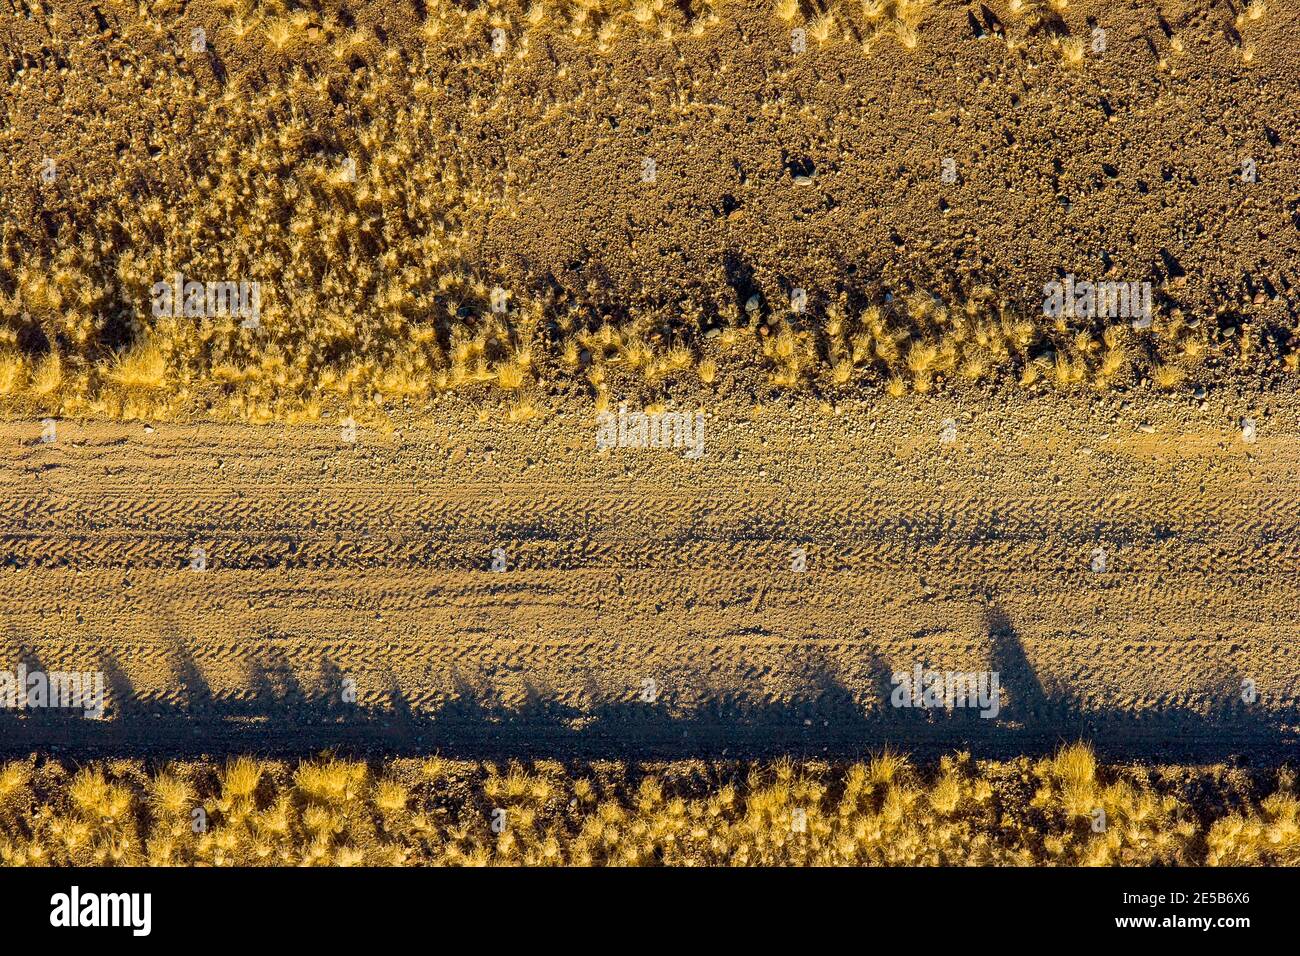 Gravel road photographed from Hot Air Balloon flight, Namibia. Stock Photo